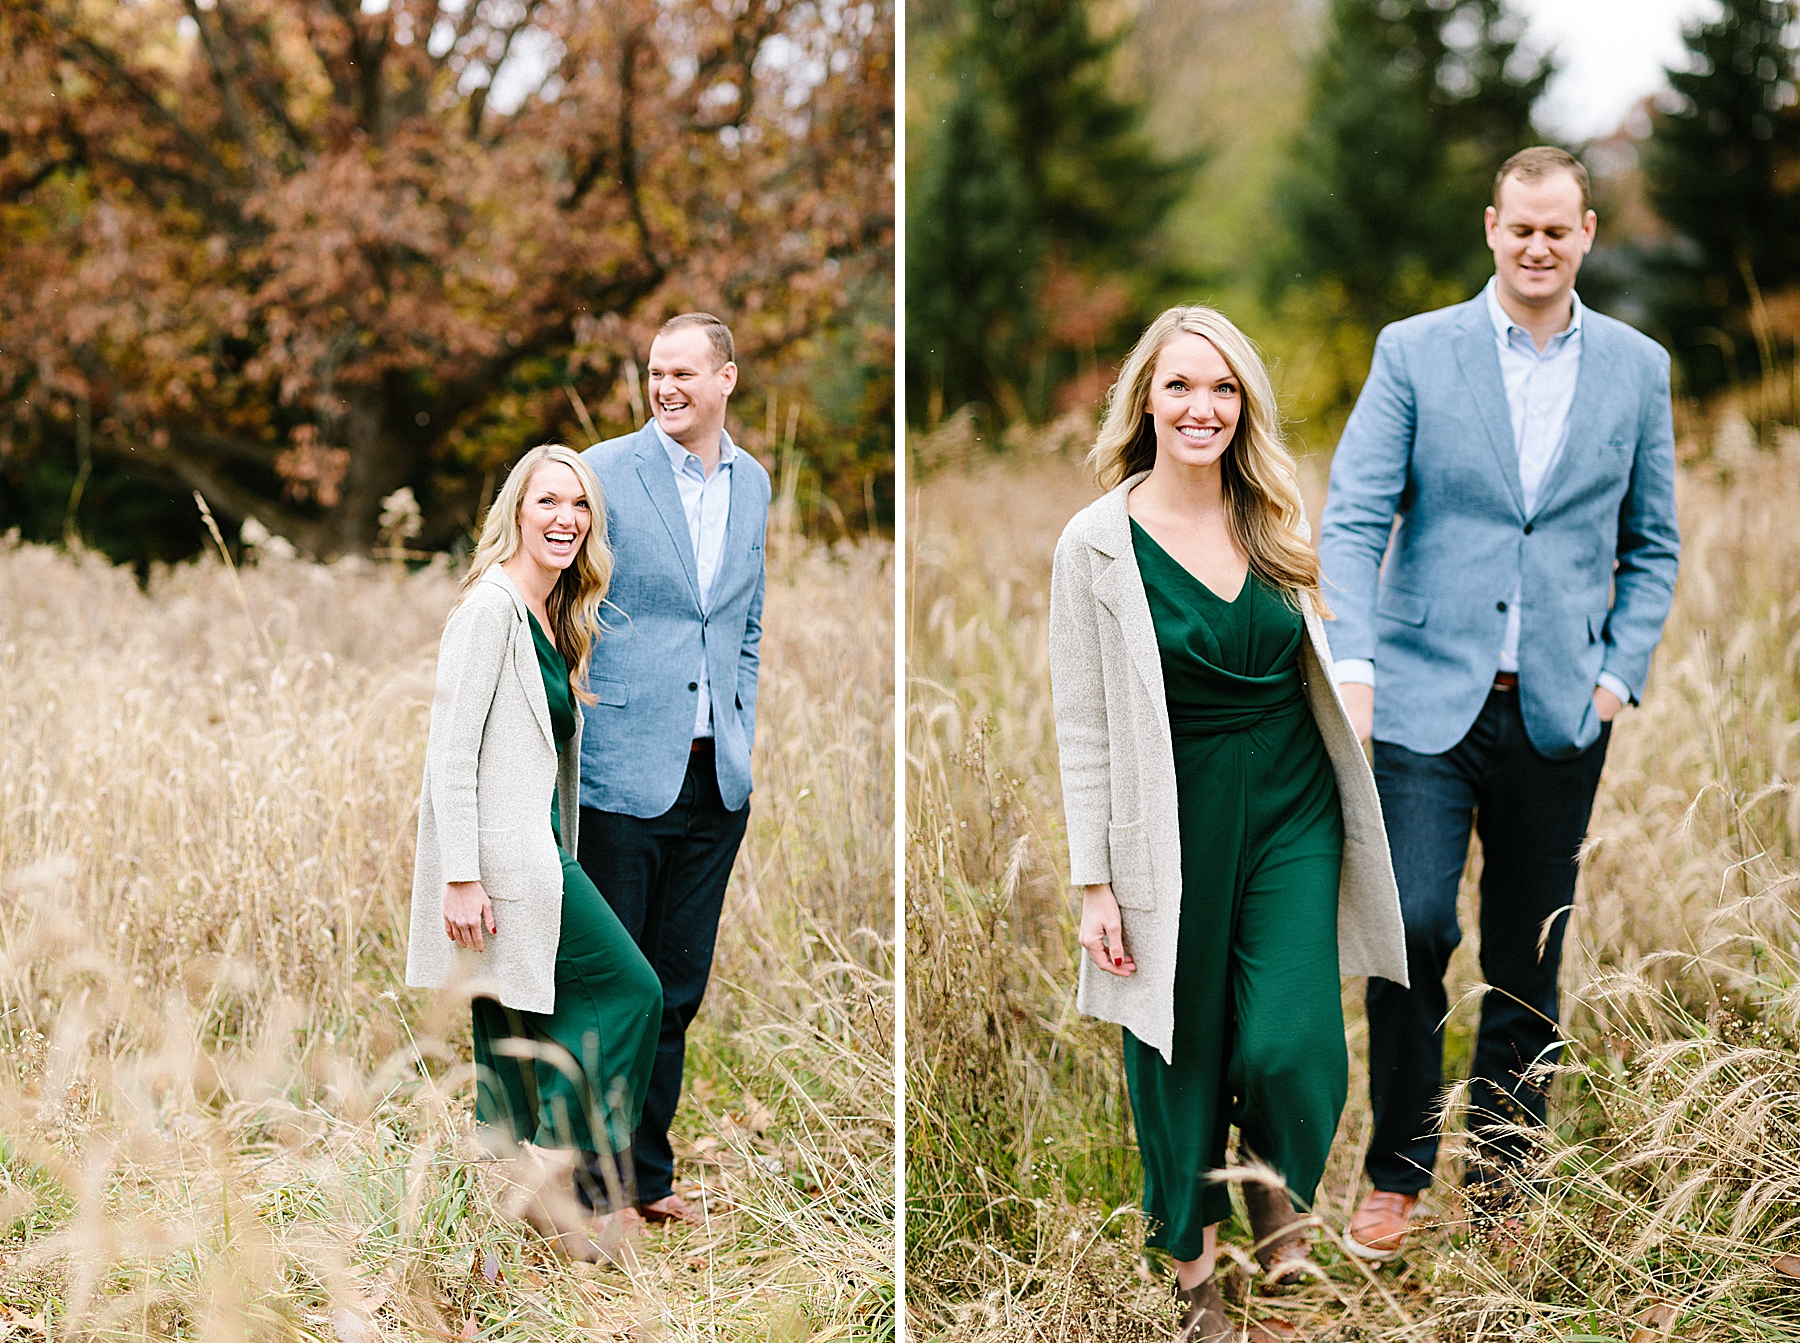 Holliday Park Engagement Session